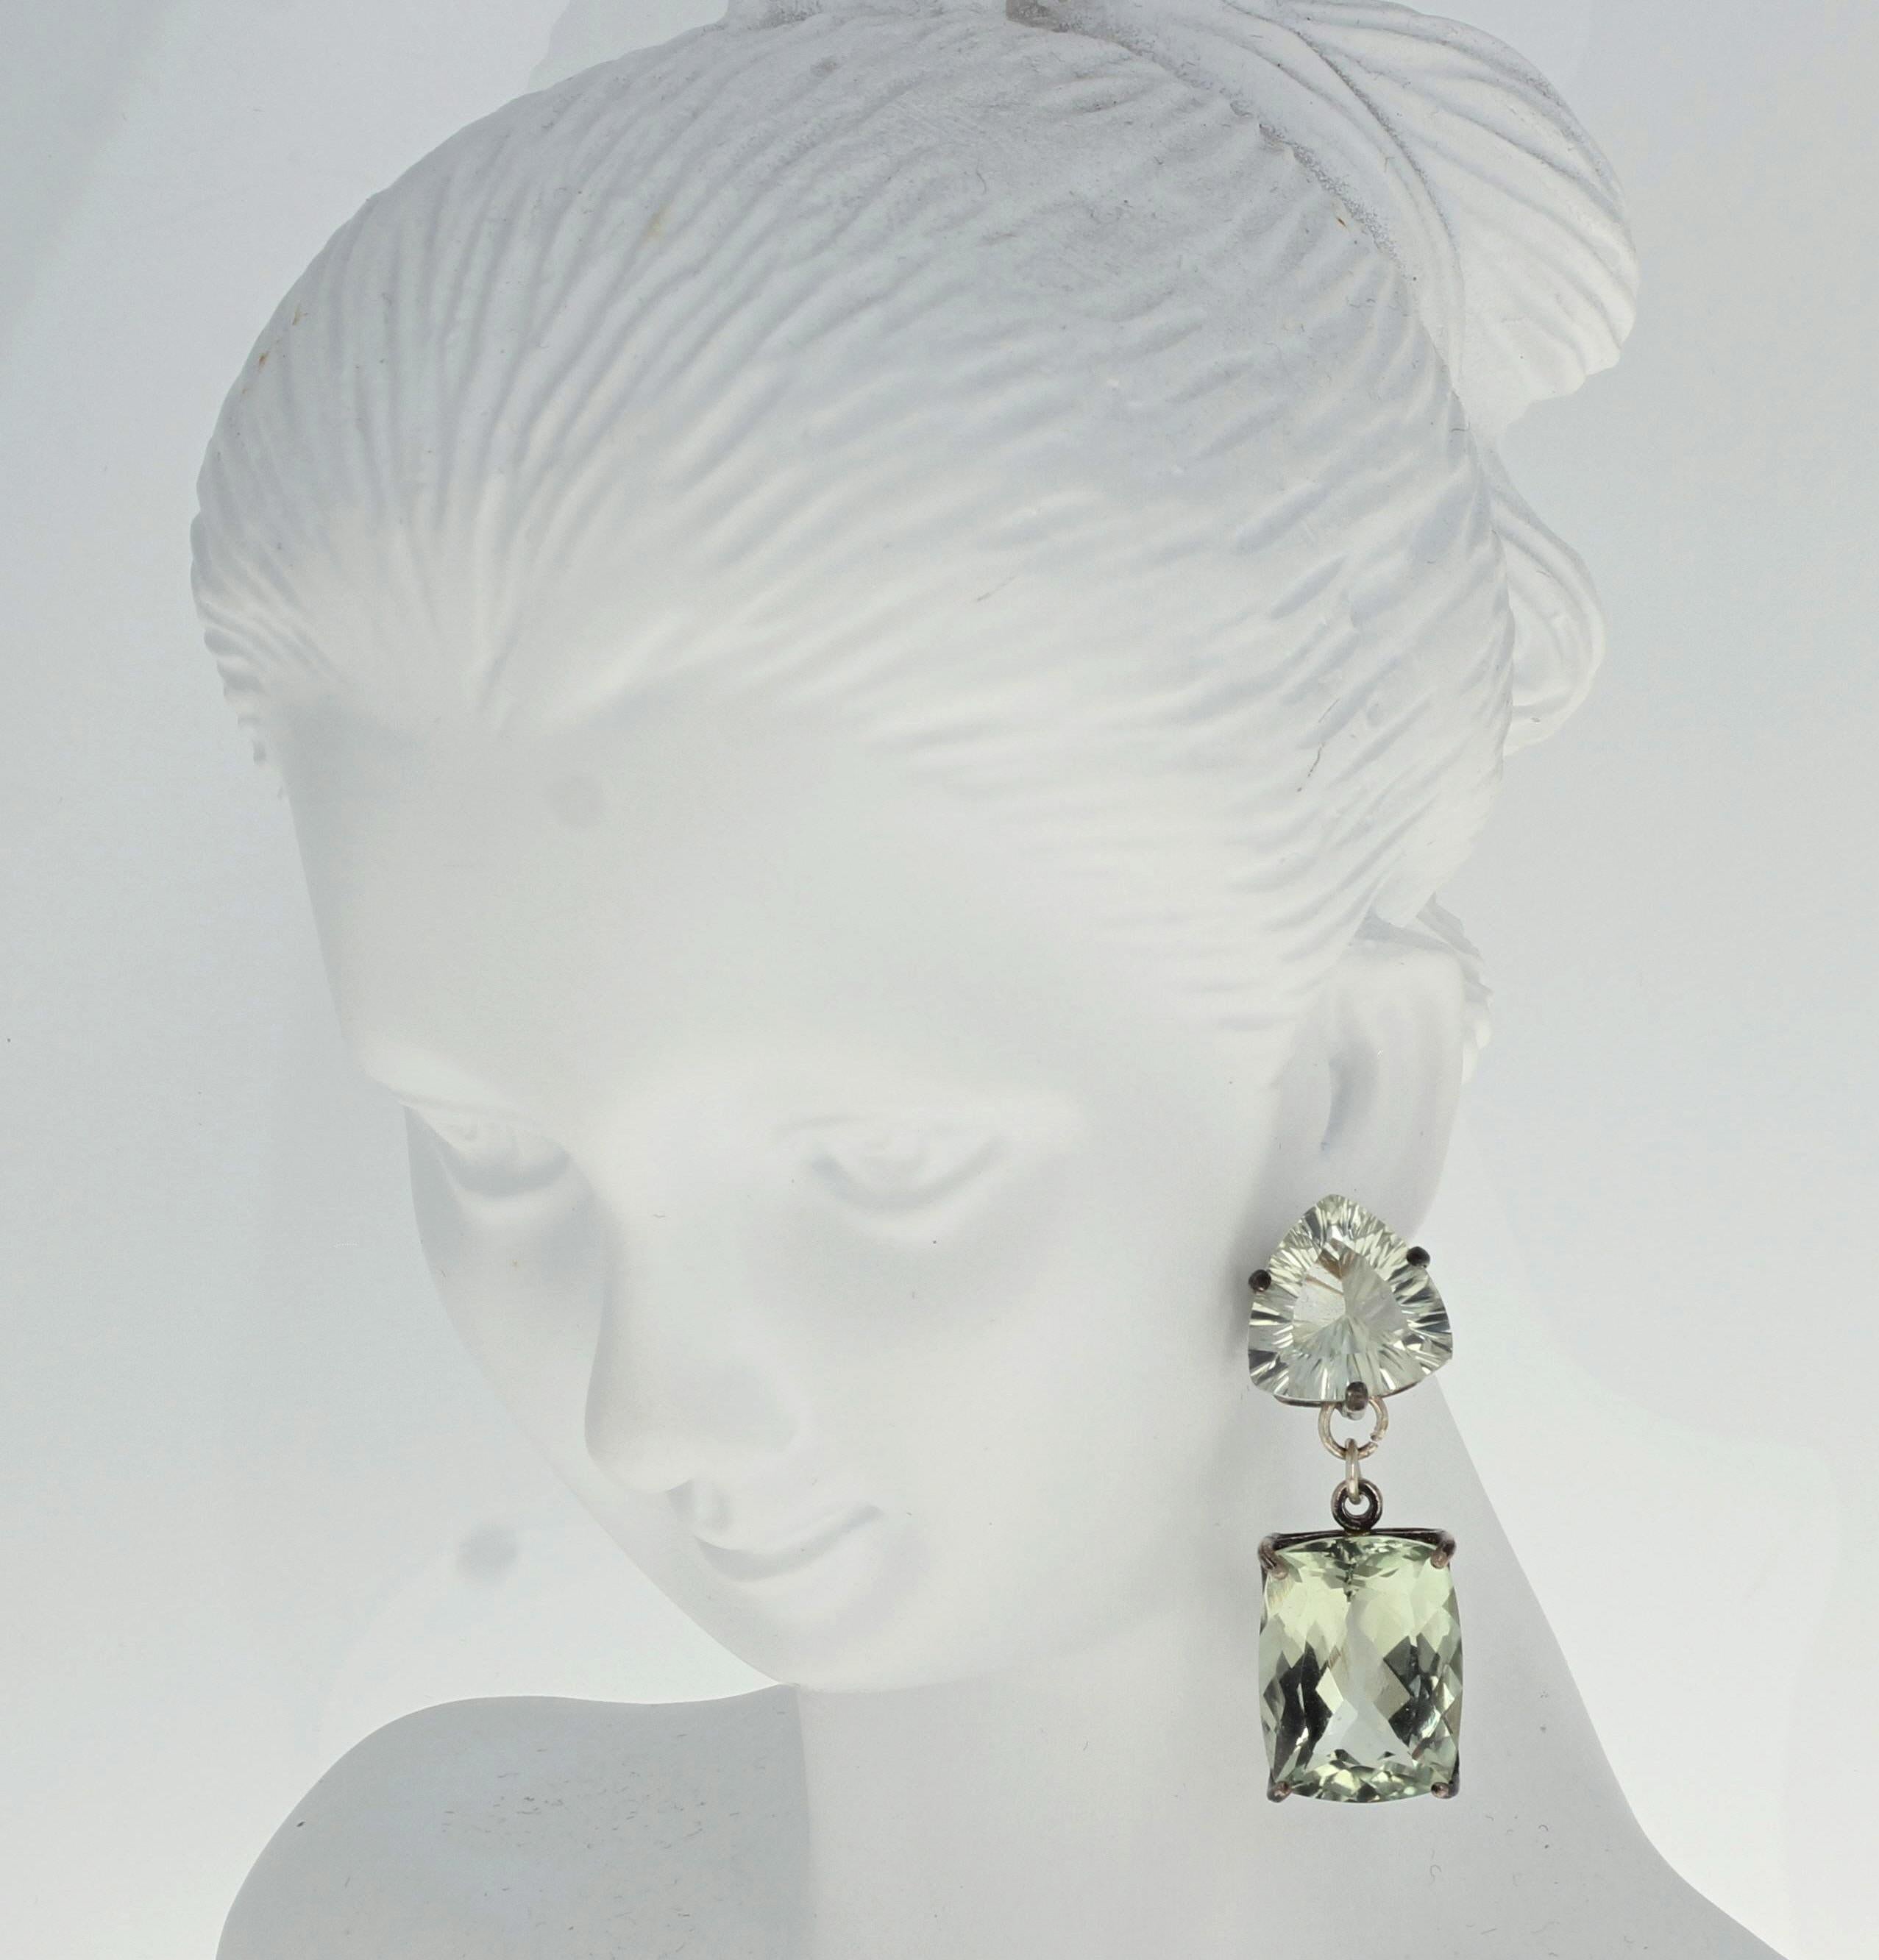 These sterling silver stud earrings dangle brilliantly approximately 33mm long.  The trillion Praziolites are 12mm x 12mm approximately and the cushion Praziolites are approximately 16mm x 12mm.  They are set in easy to use sterling silver stud